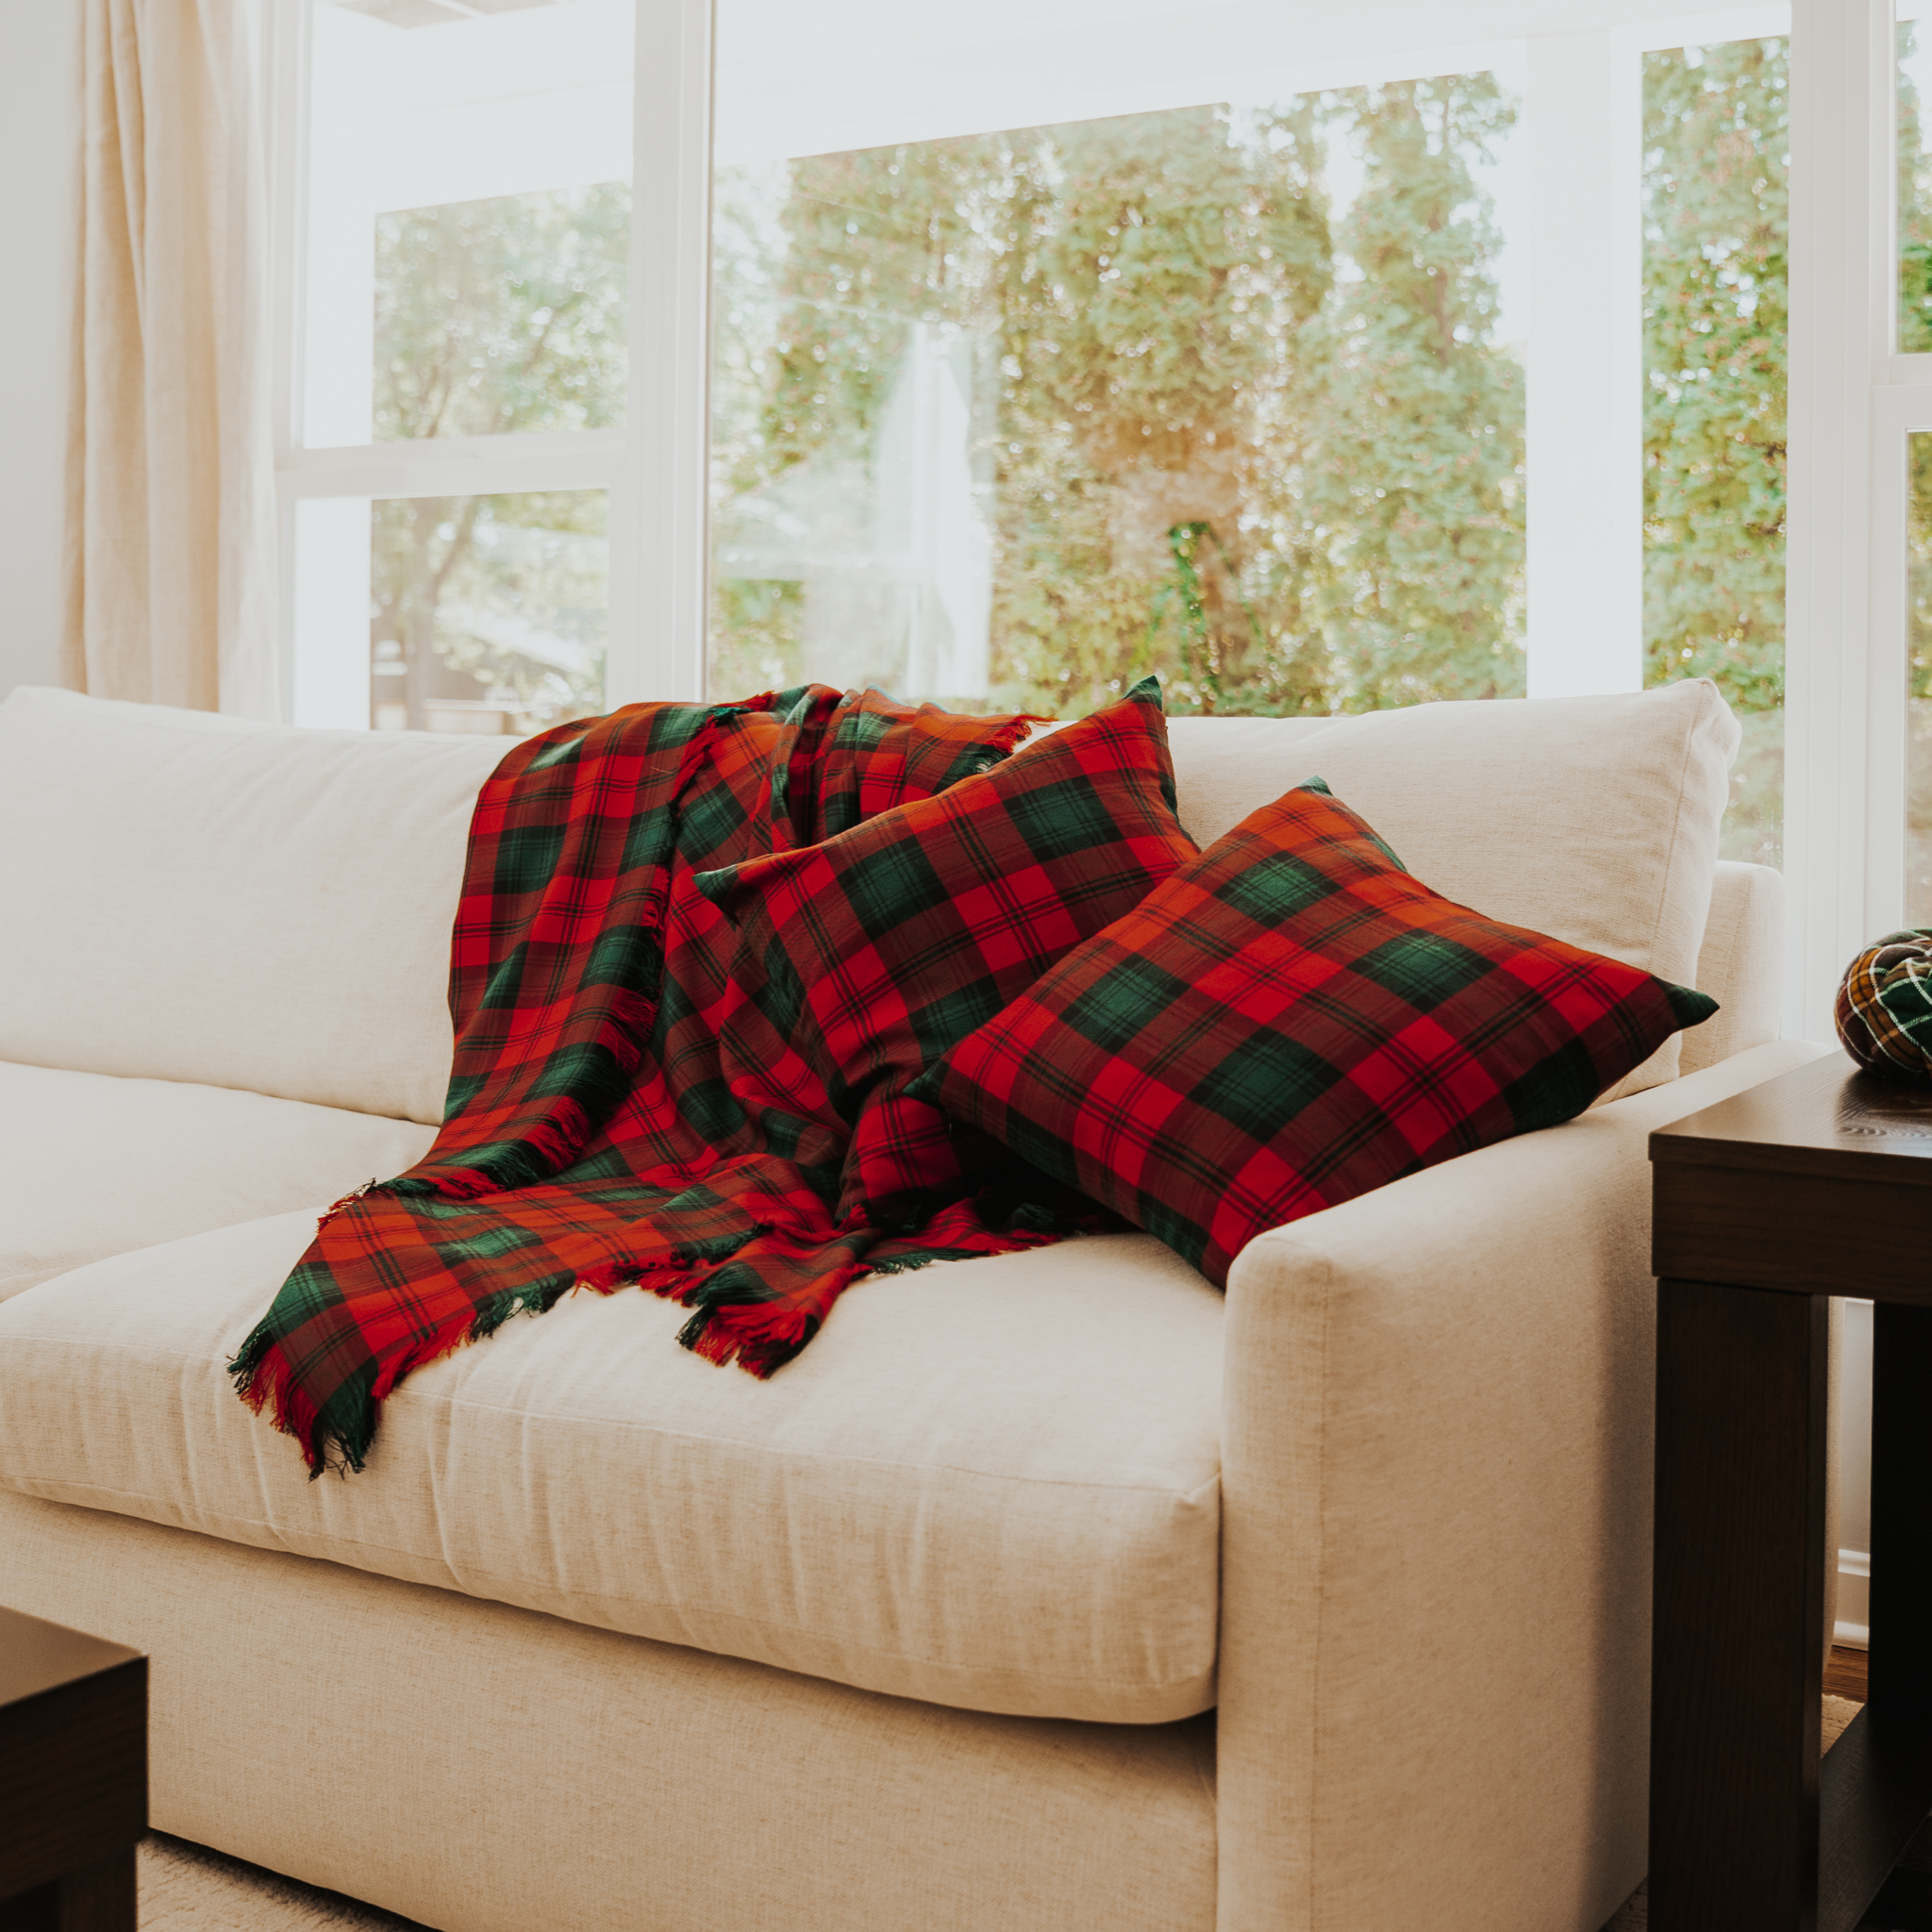 A green and red tartan pillow and blanket set resting on a cream coloredcouch.